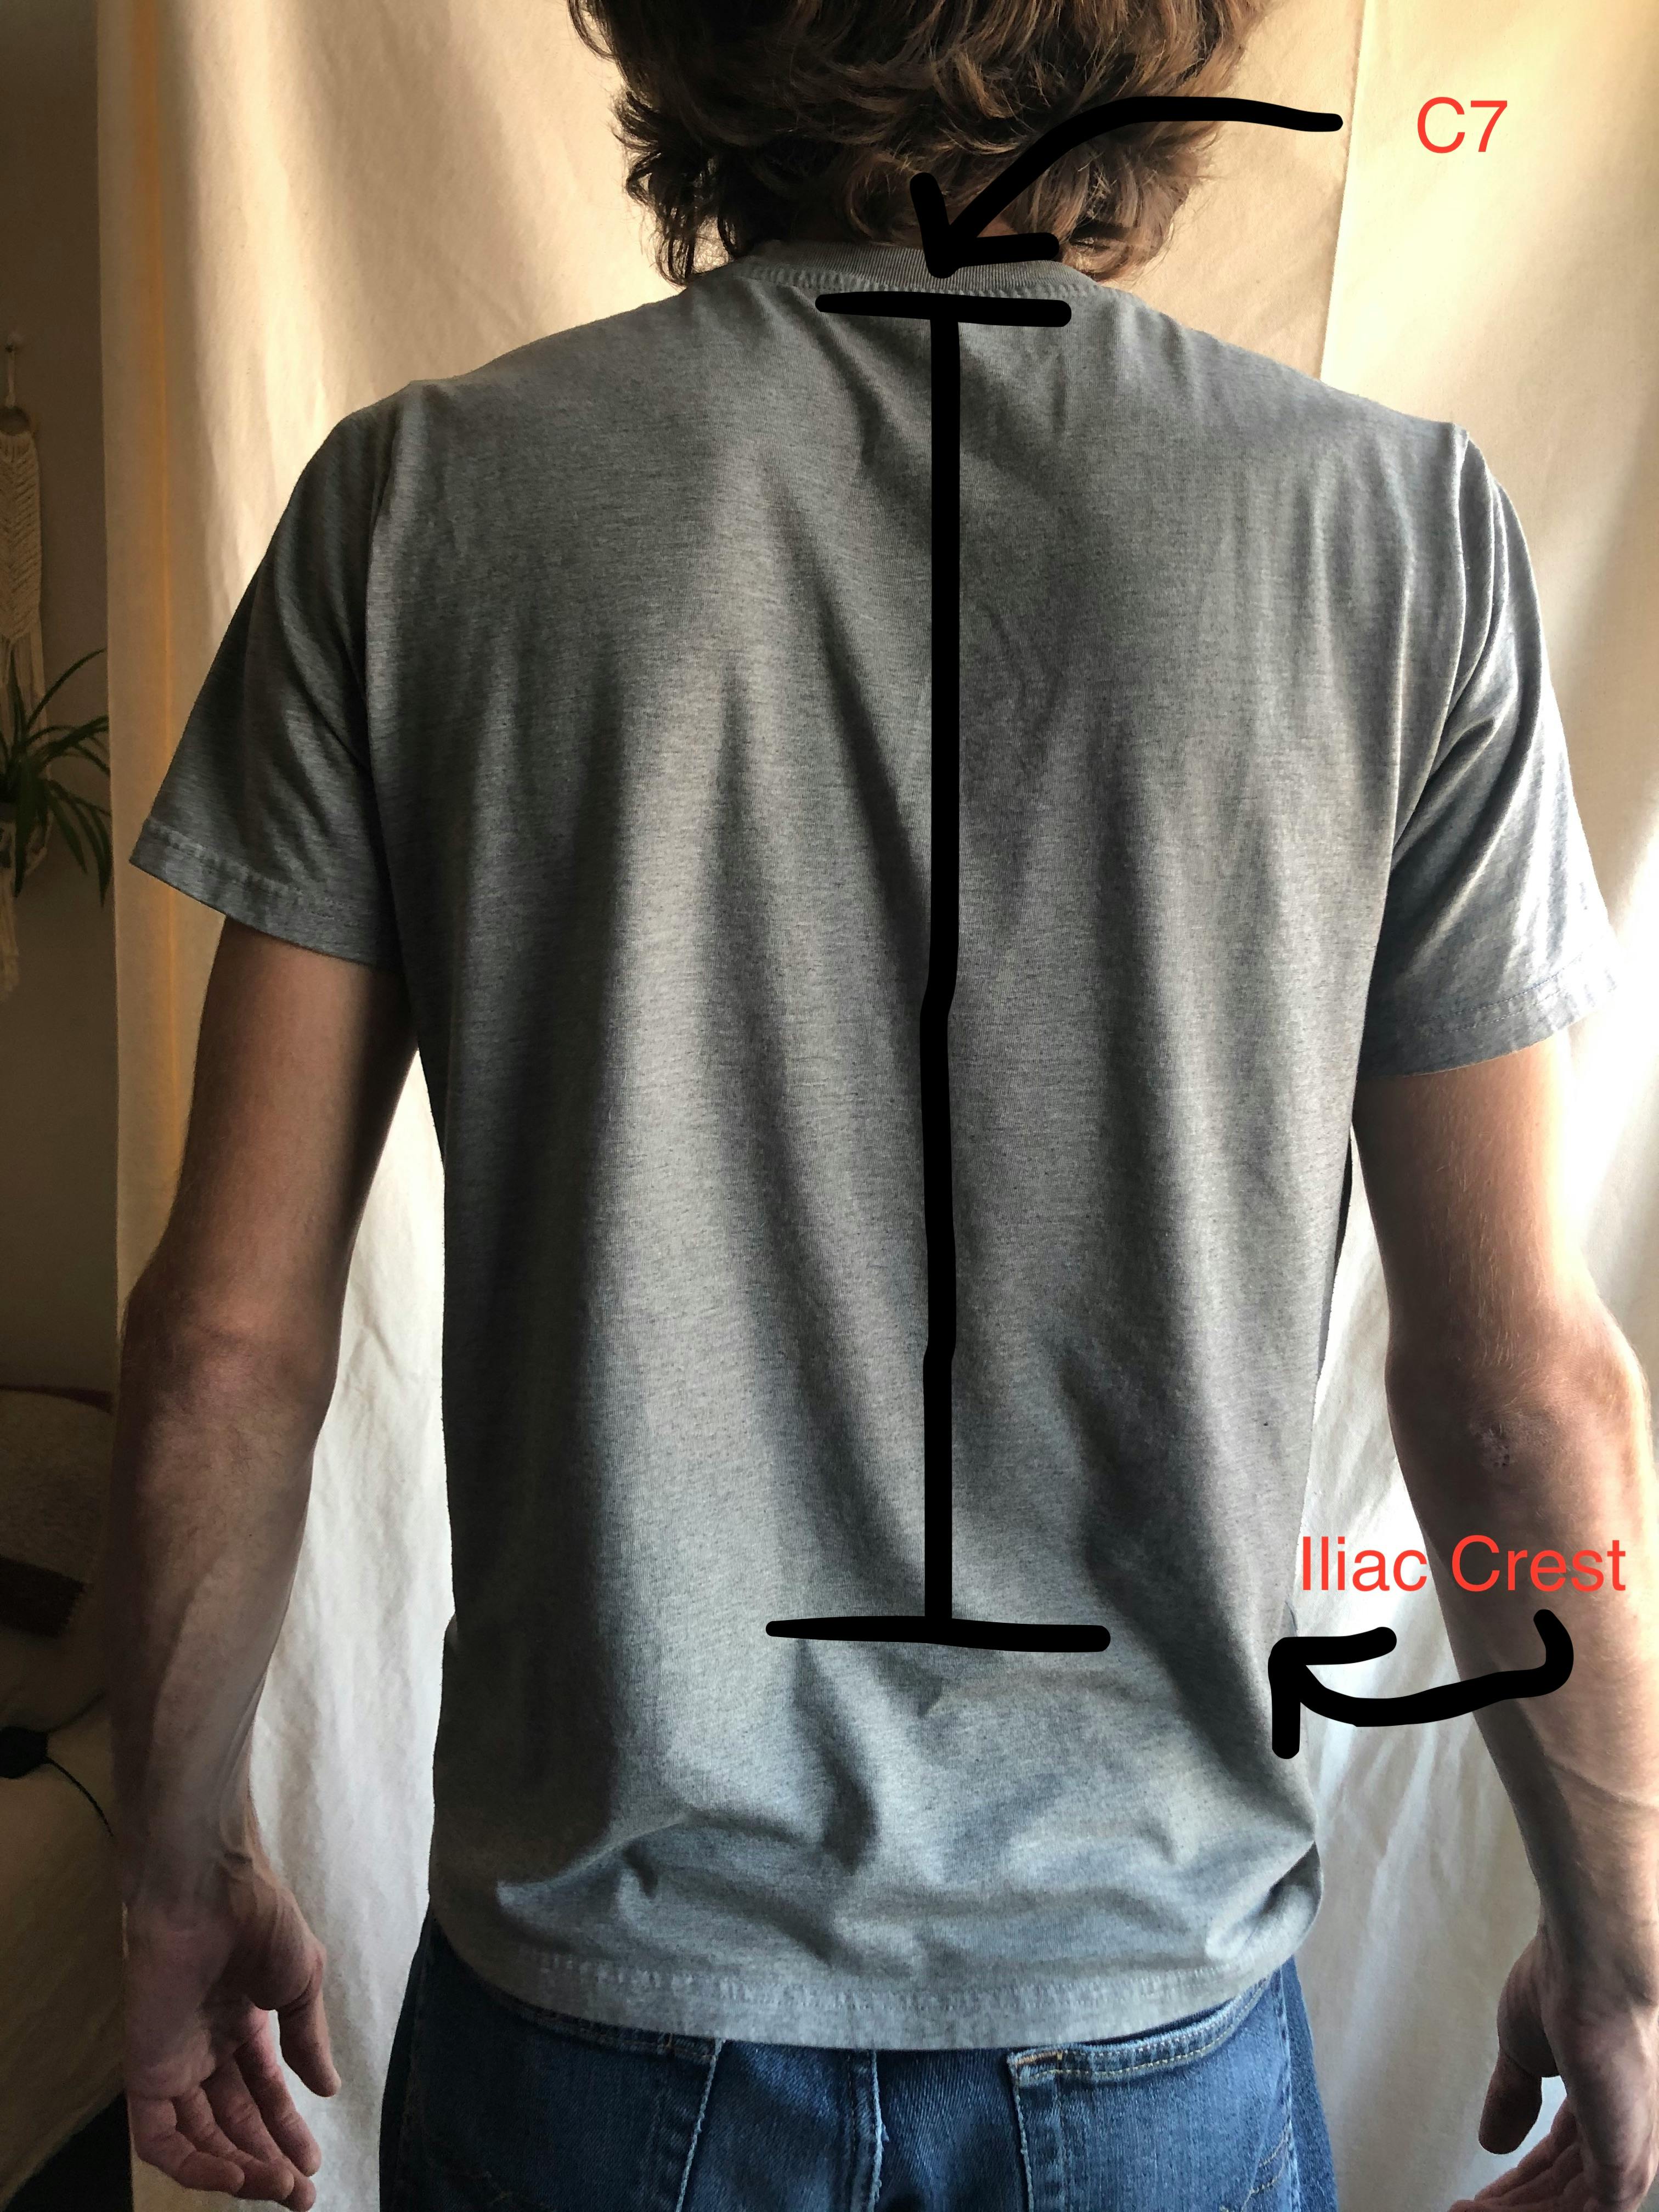 A photo of a man's back with diagrams showing the C7 and iliac crest